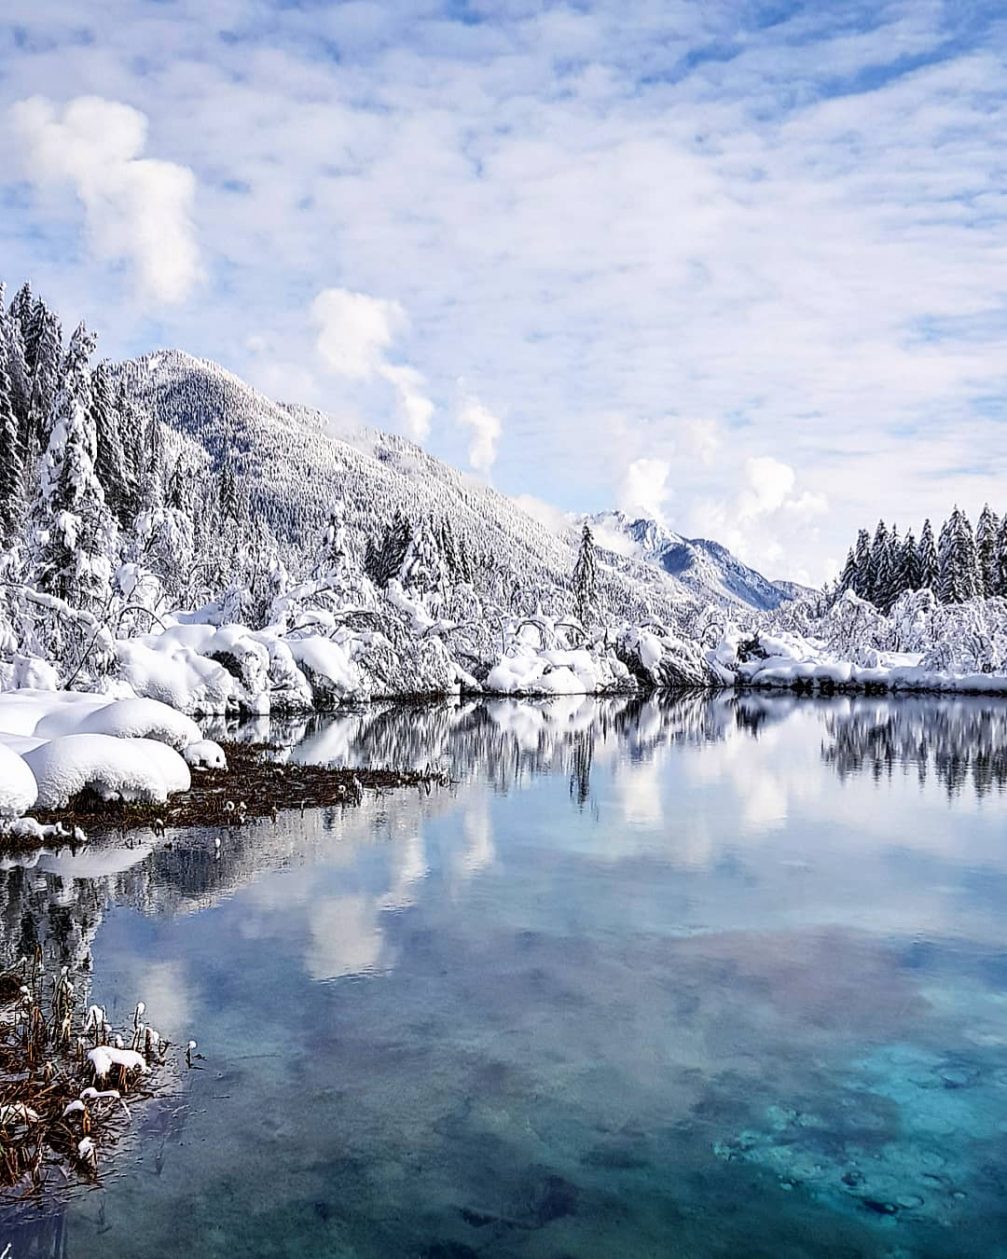 Lake Zelenci in Slovenia in winter with Slovenian Alps in the background